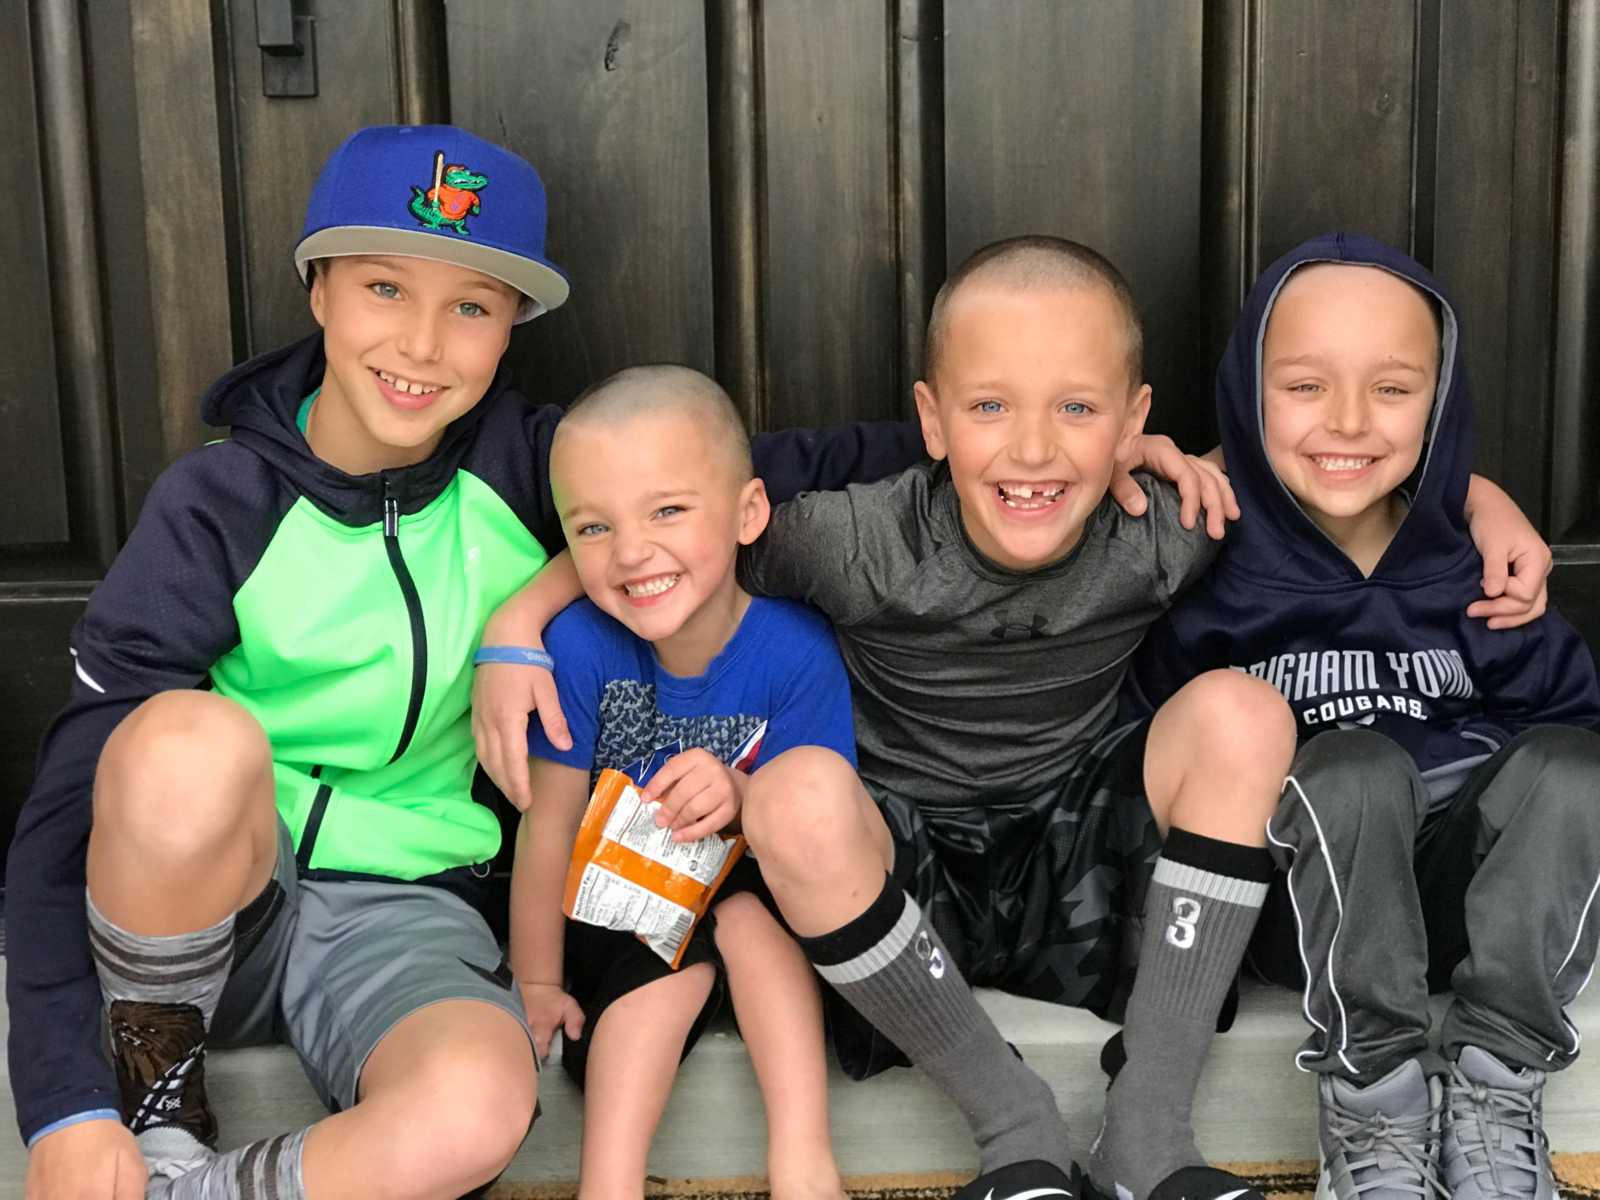 Boy who will have leg tumors later in life sitting with three brothers 